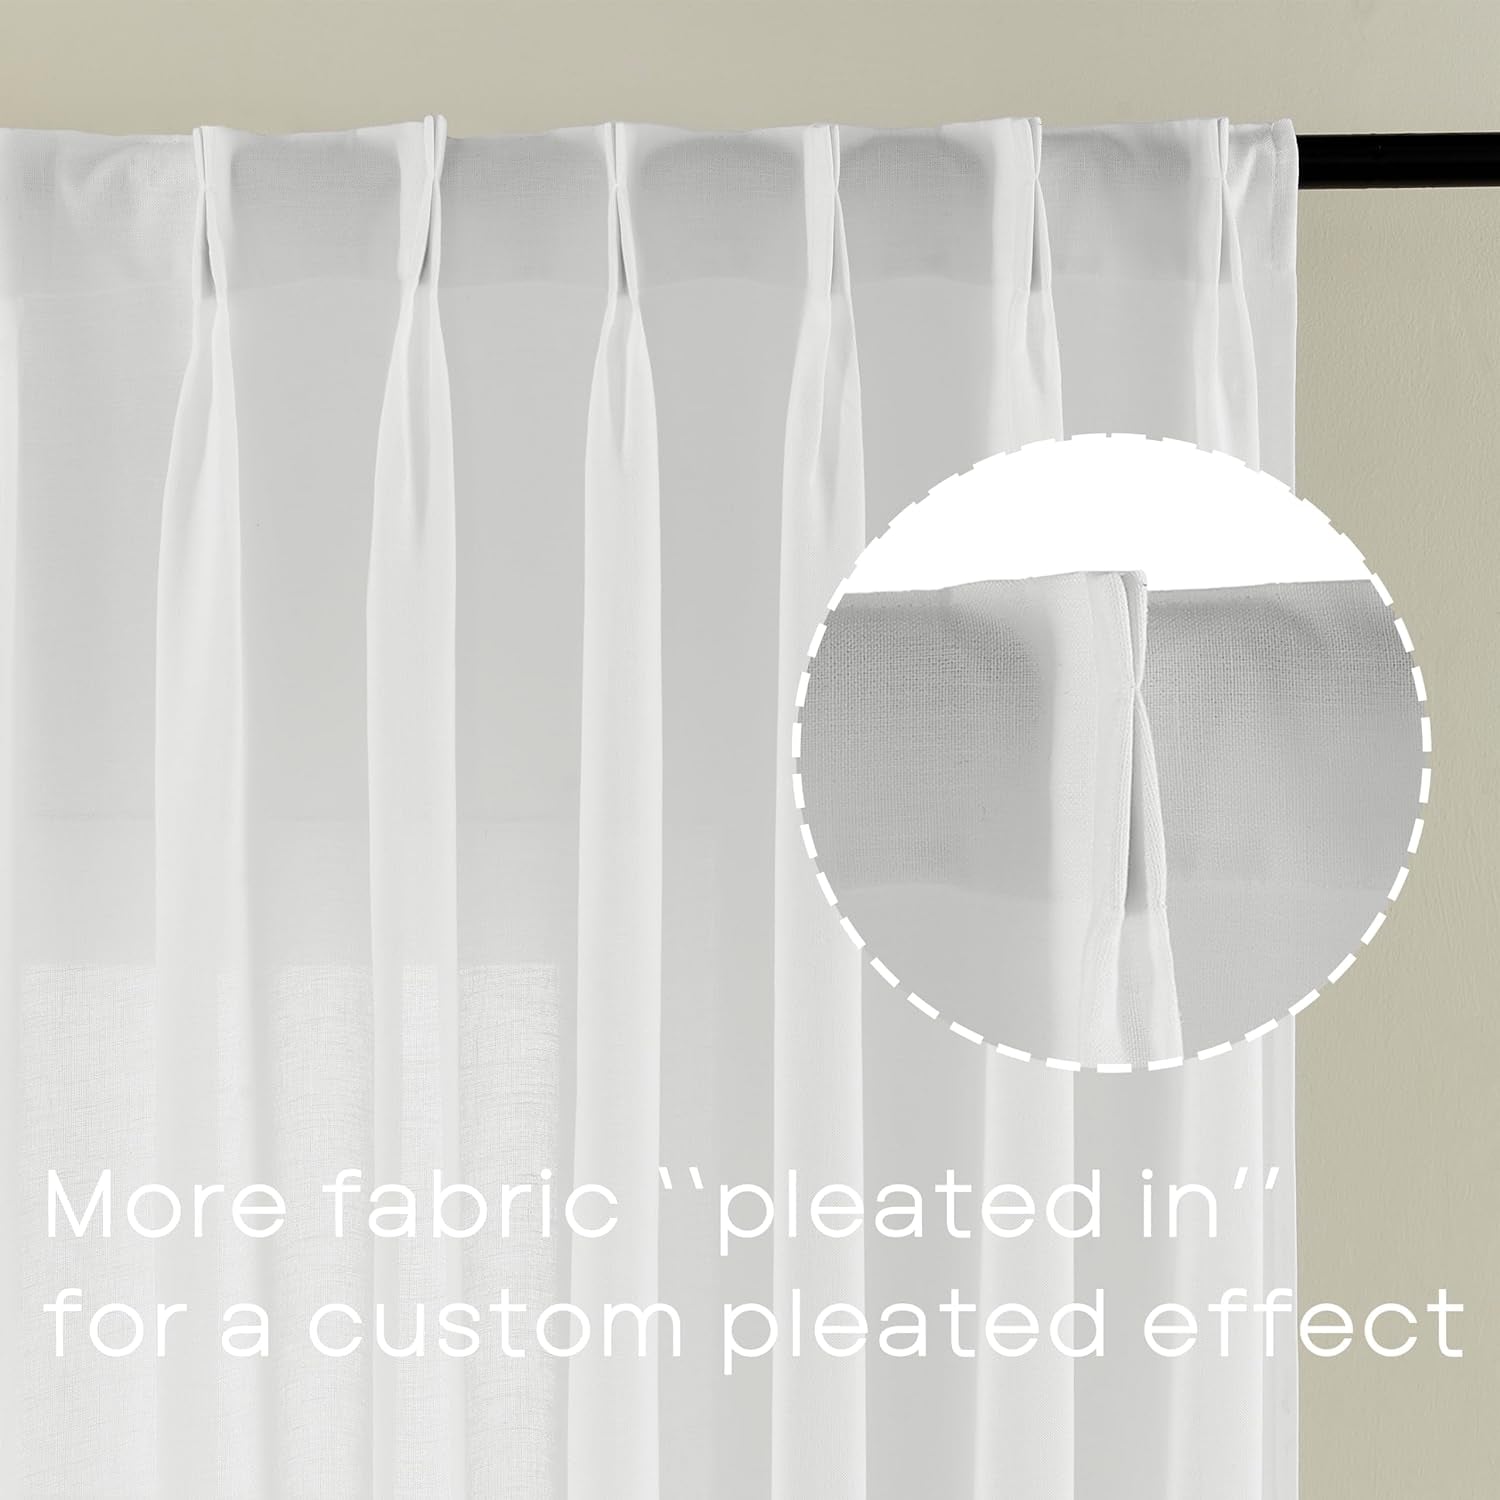 SHINELAND White Linen Curtains 84 Inches Long for Bedroom 2 Panels Set,Sheer Boho Pinch Pleated with Hooks Back Tab Window Sheers Draperies 84 Length for Dining Room Living Room Office at Home  SHINELAND   